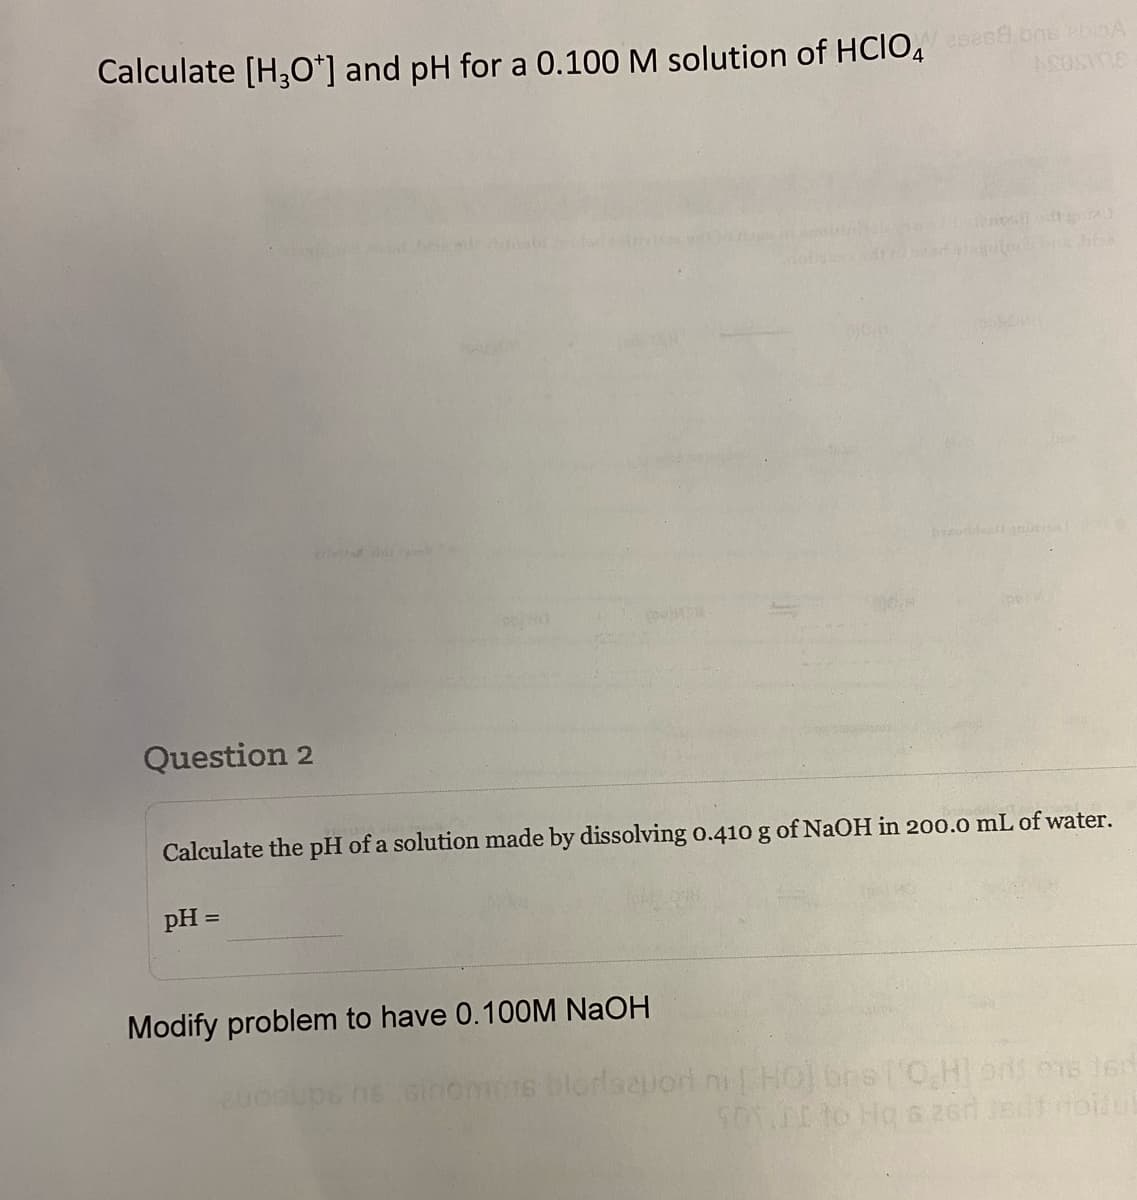 Calculate [H3O+] and pH for a 0.100 M solution of HCIO4 csend ons bio
ASOSIDE
Question 2
privind d
Calculate the pH of a solution made by dissolving 0.410 g of NaOH in 200.0 mL of water.
pH =
Modify problem to have 0.100M NaOH
blorlaeuori
2000
olt grat
toon bits Jifos
ni [HO] bre['O,H] ons ons ten
SOT LI to Hq & 26 Jsdf rotul